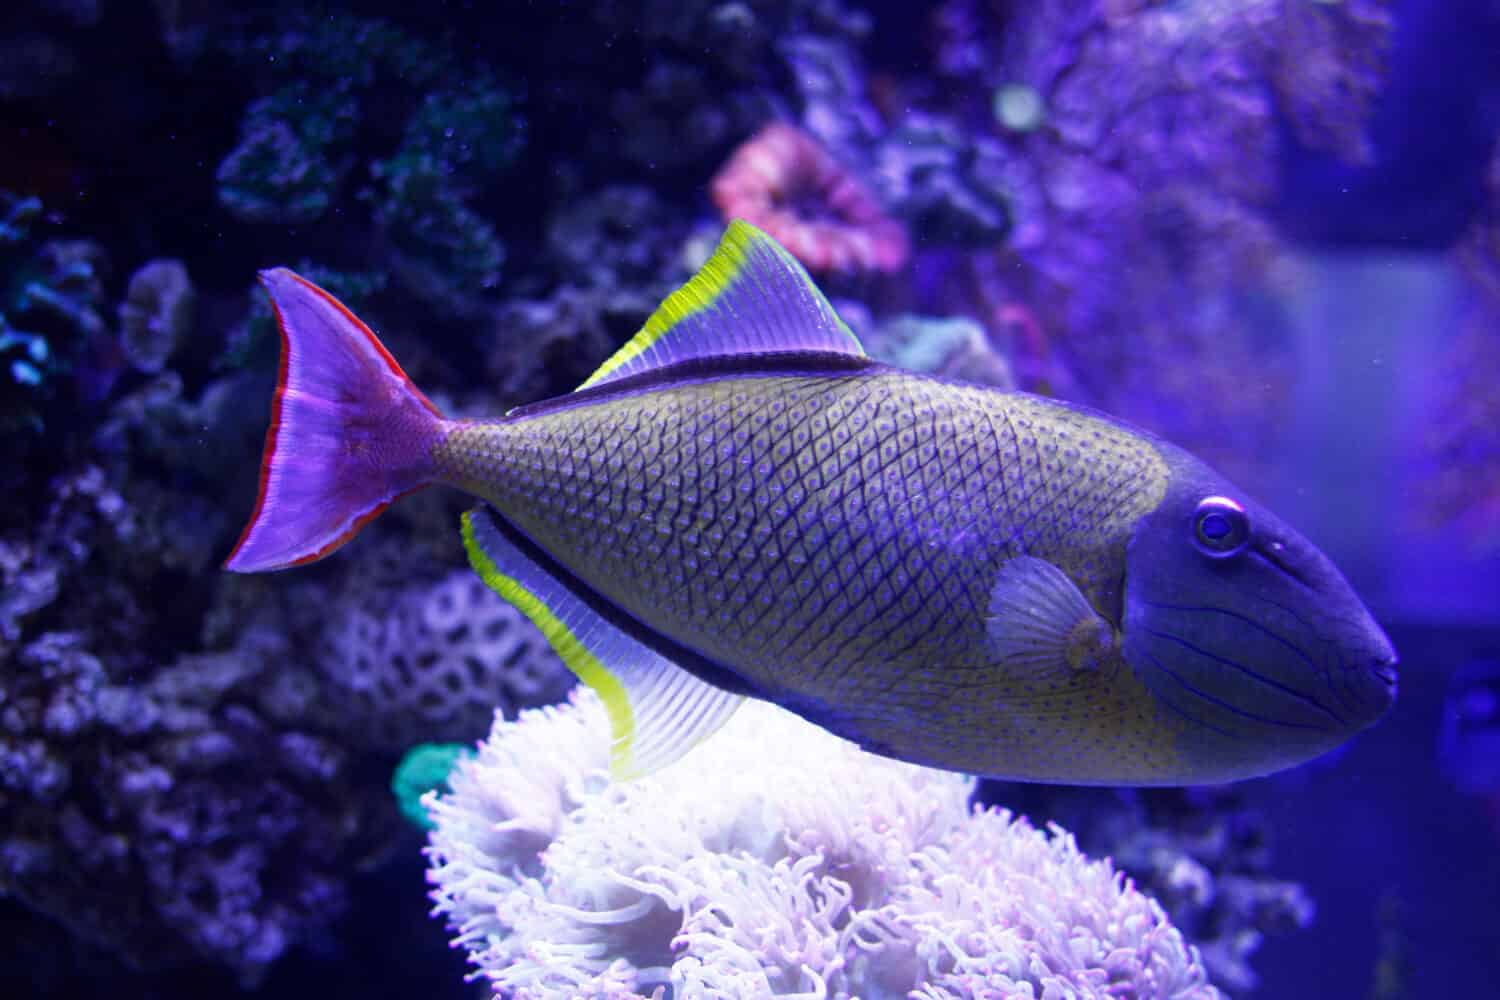 Xanthichthys mento, the redtail triggerfish, blue-throat triggerfish, or crosshatch triggerfish